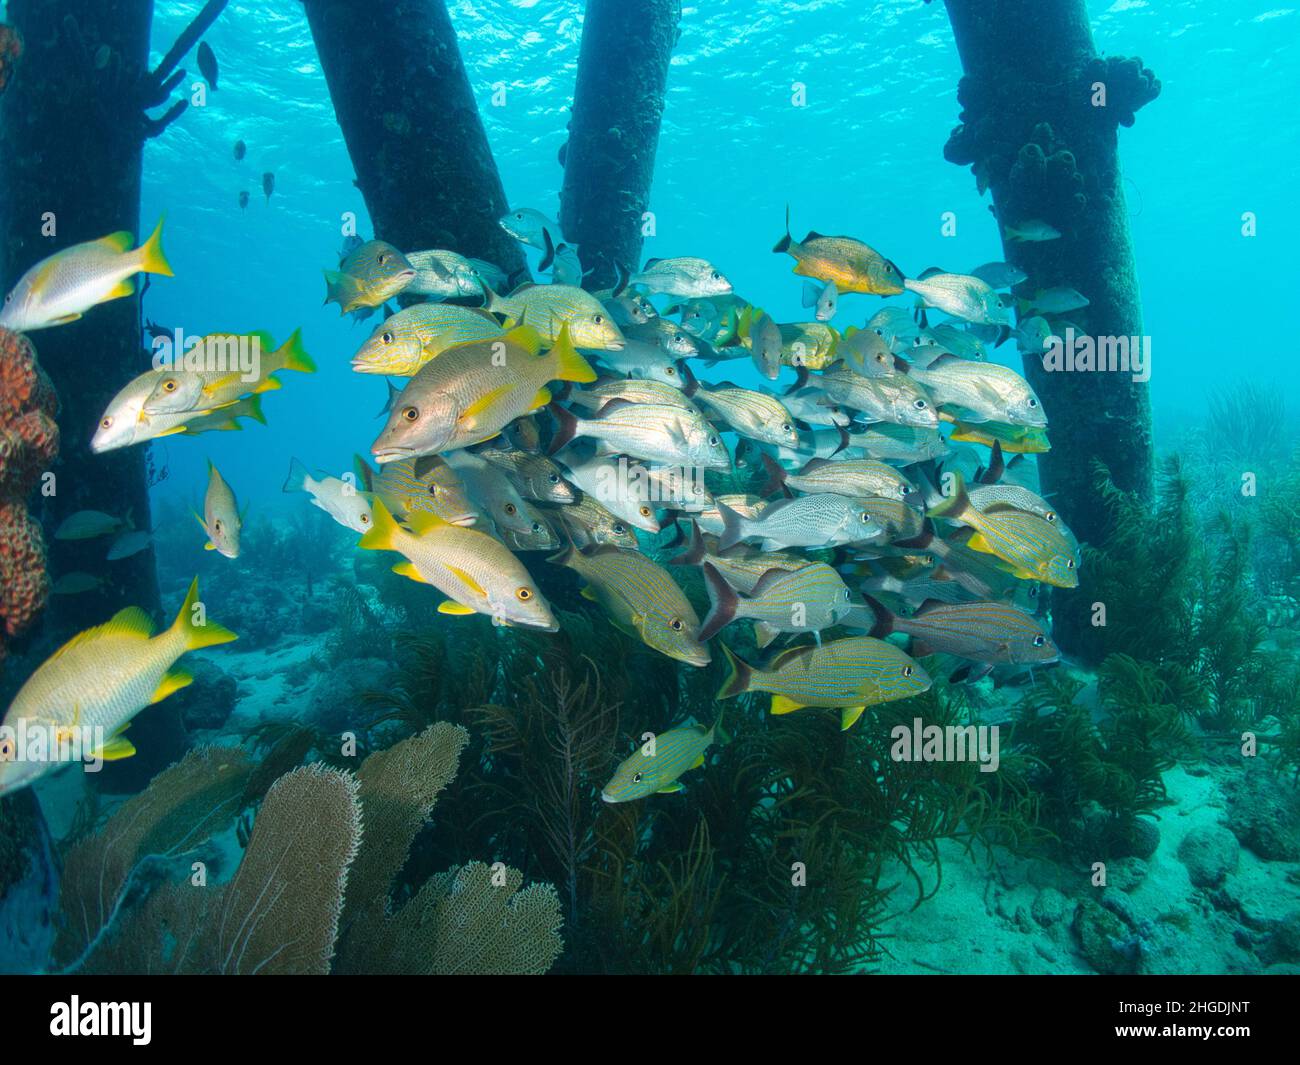 Wide-angle photo of snappers under a pier and structure. the snappers are in a big school surrounded by colors Stock Photo